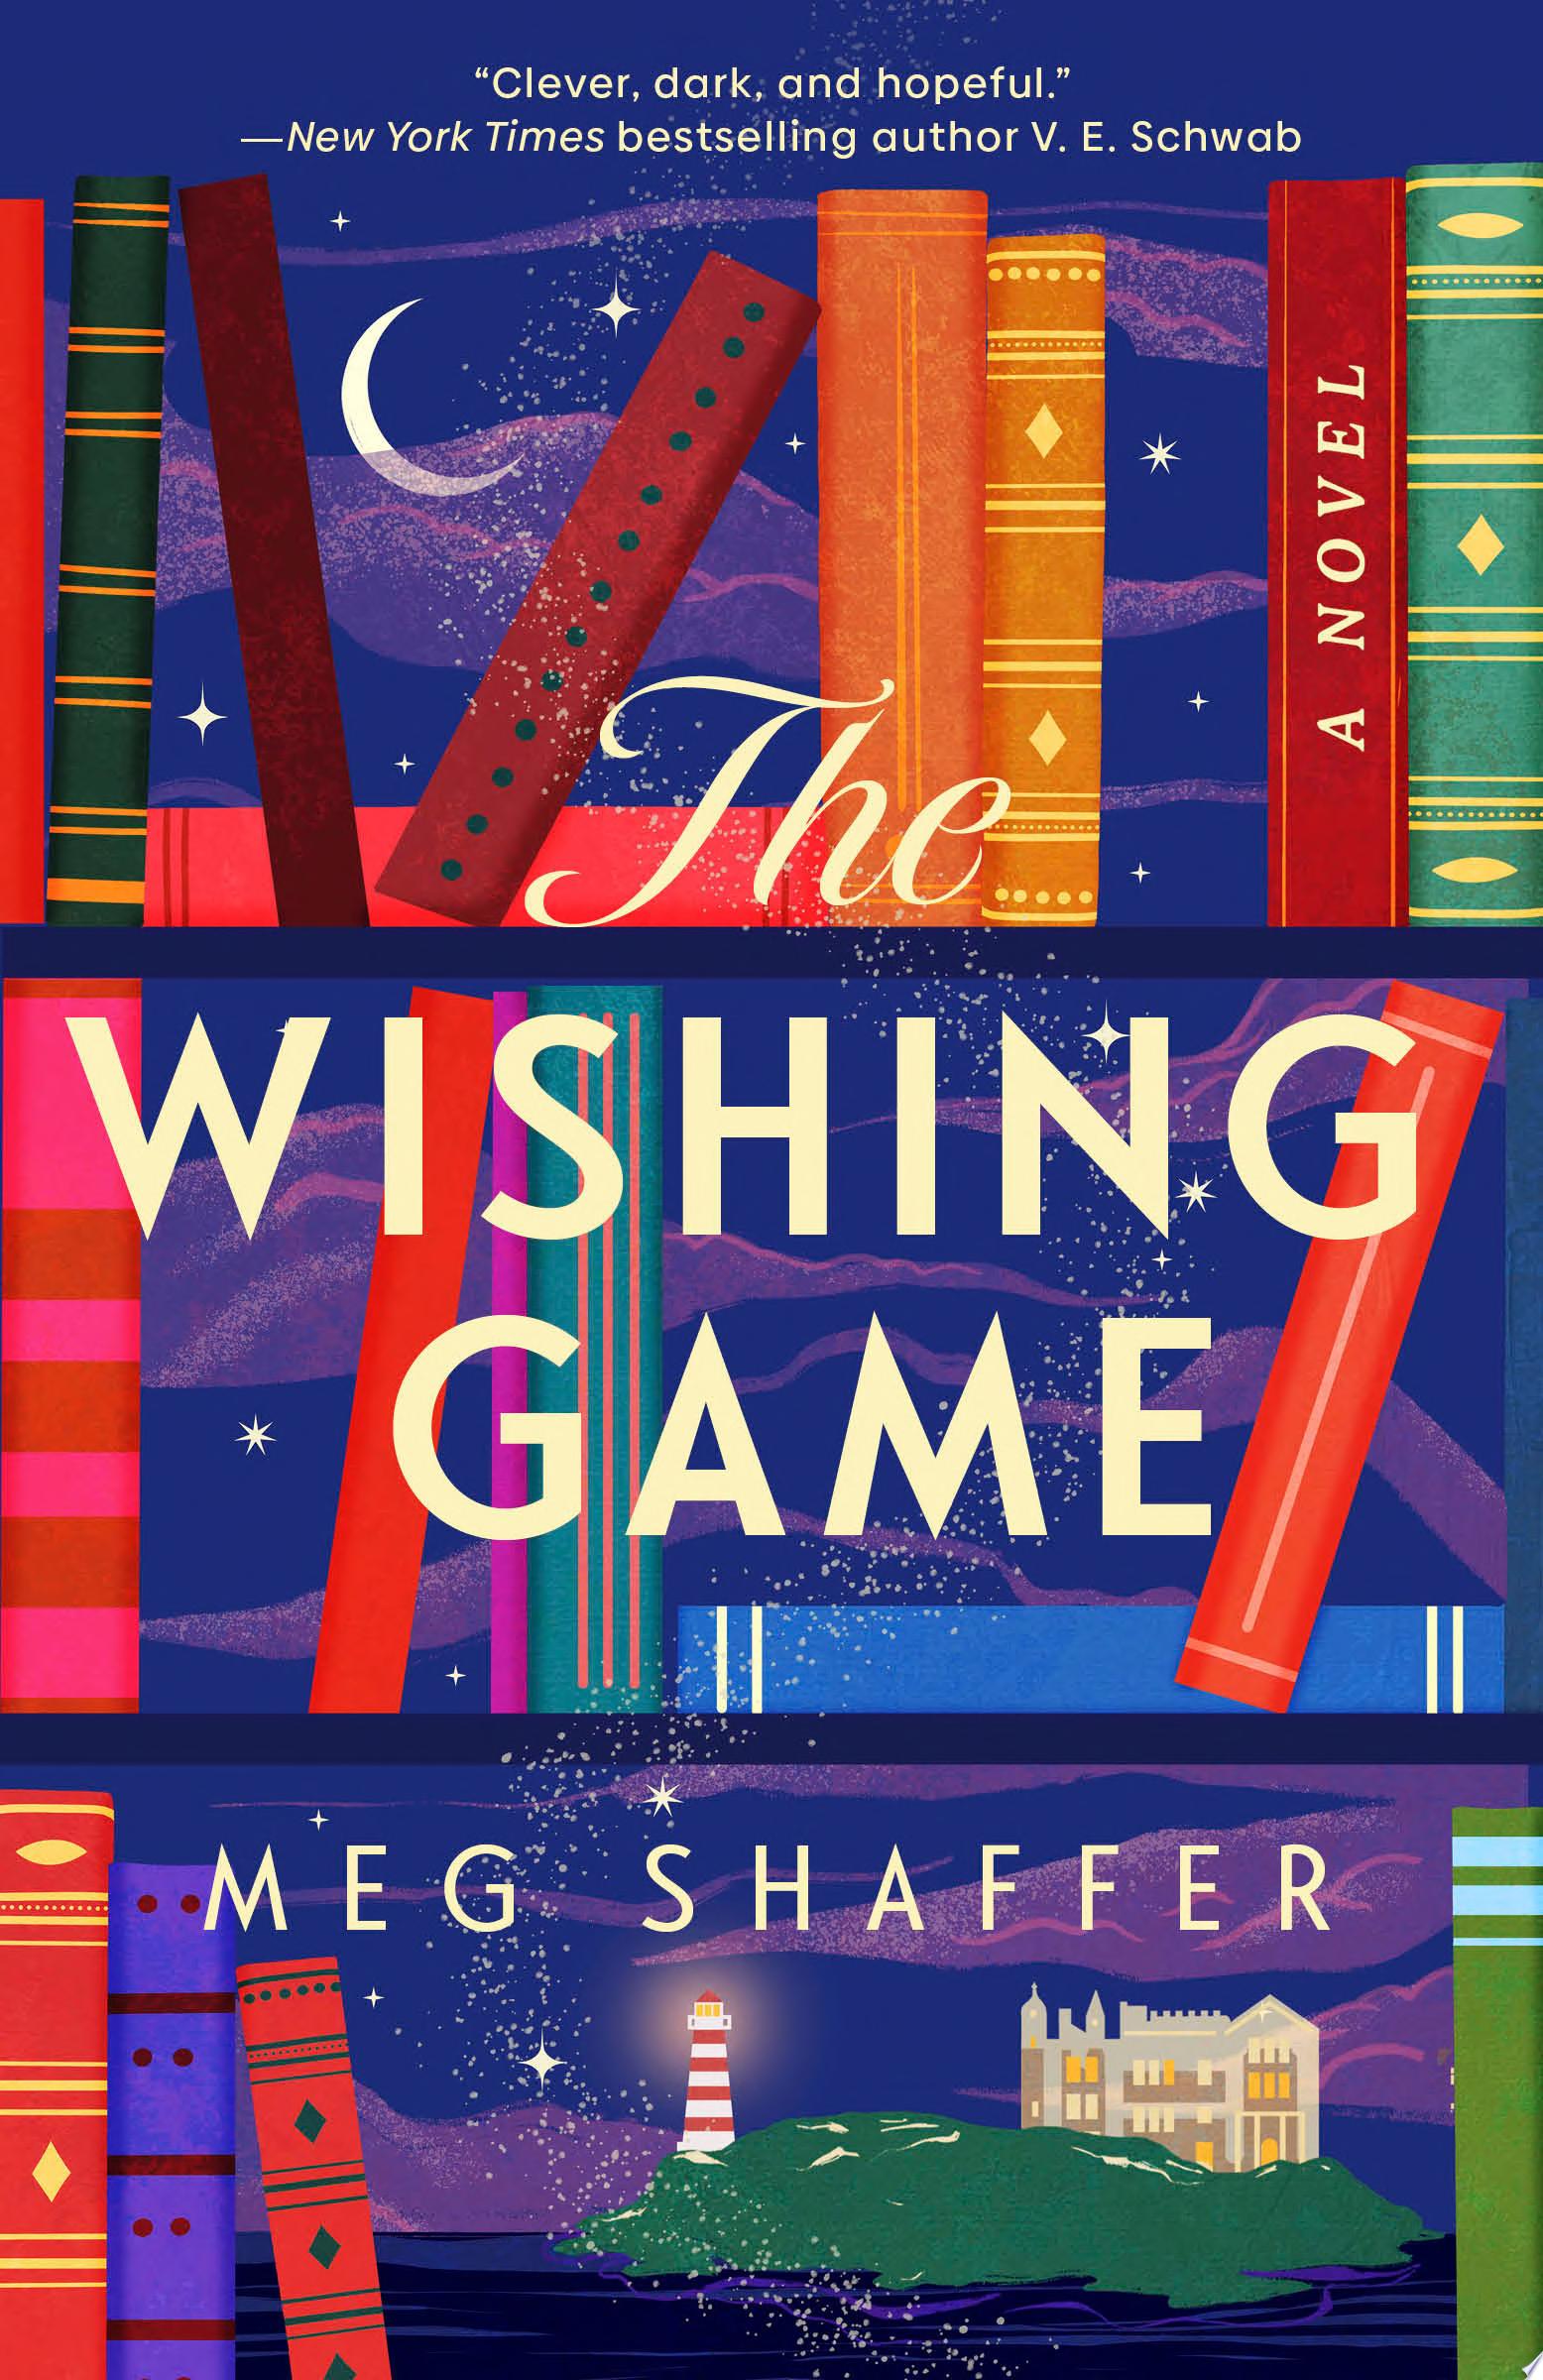 Image for "The Wishing Game"